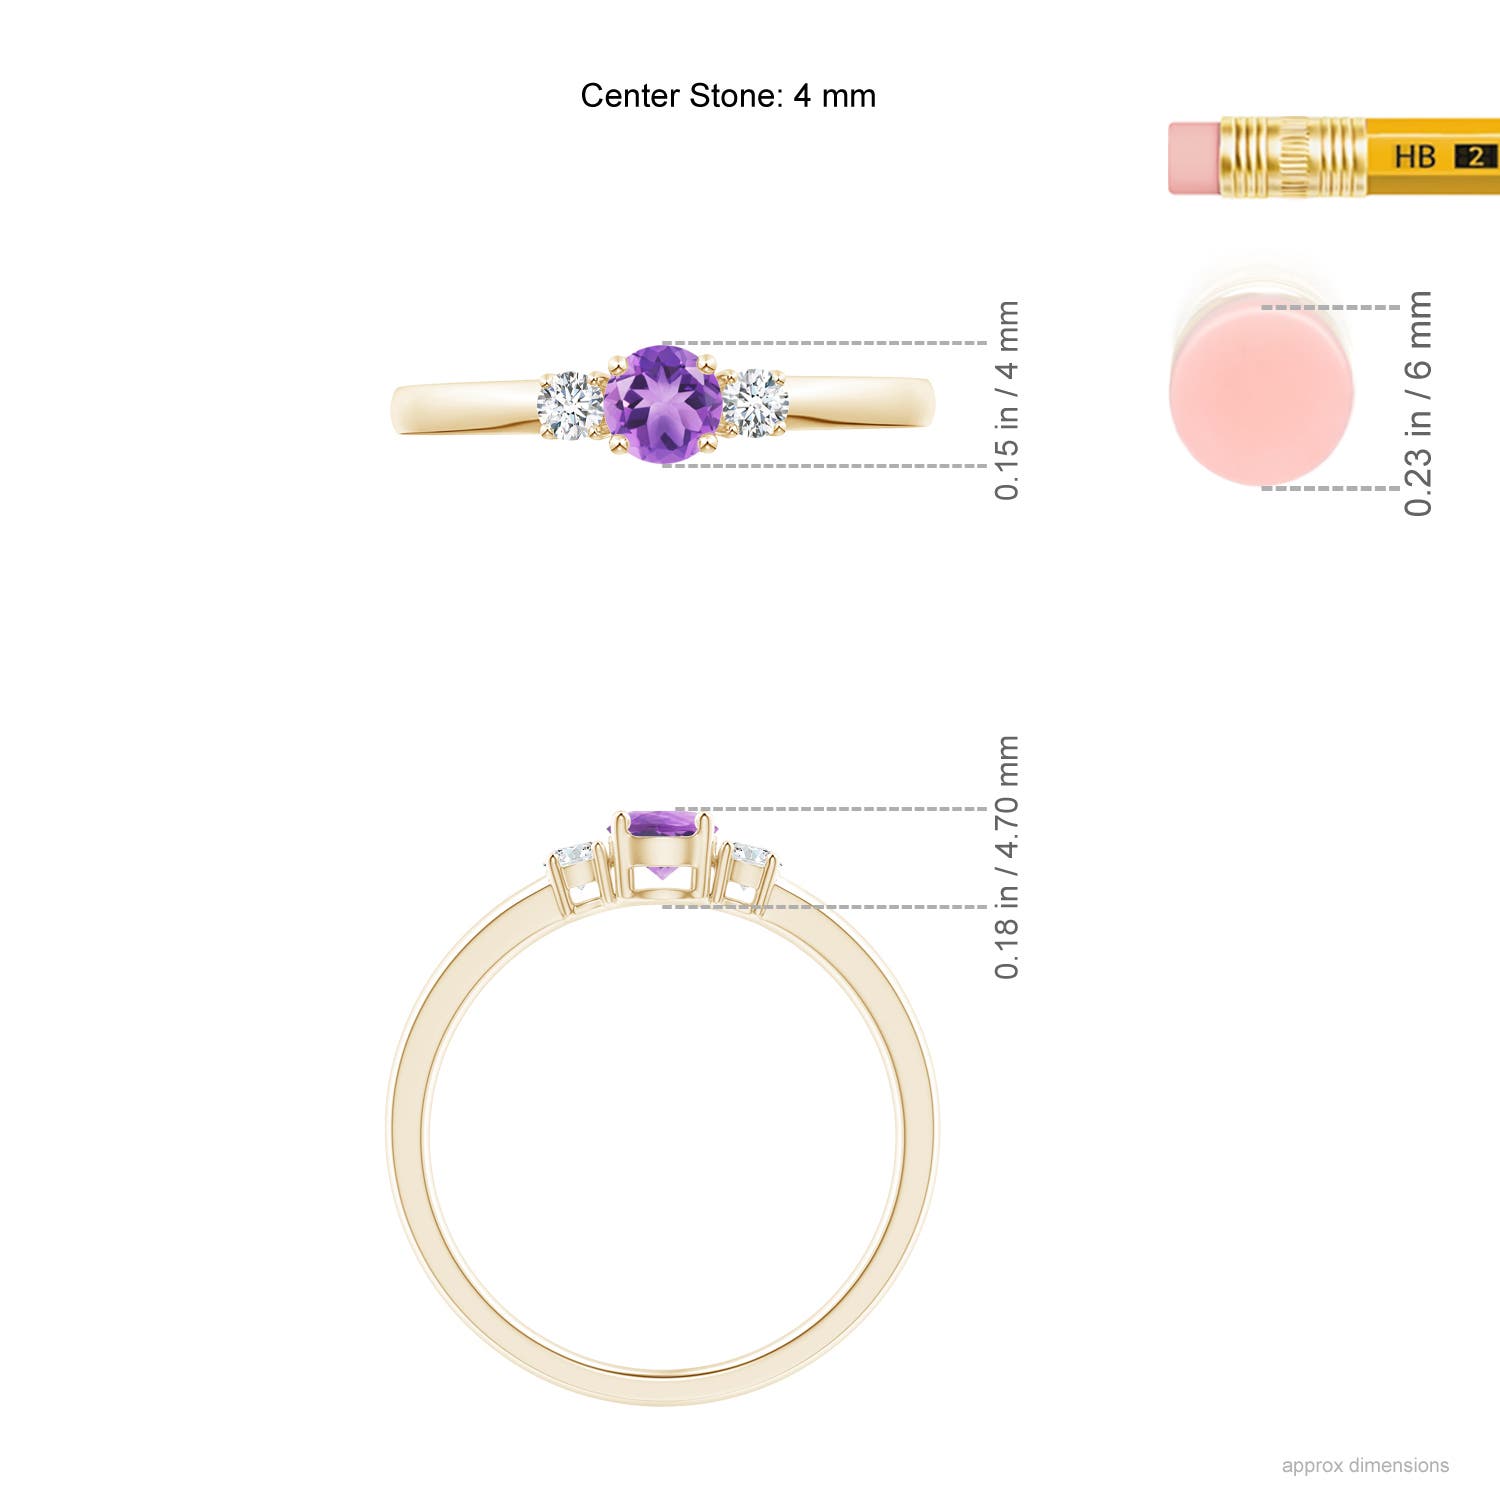 A - Amethyst / 0.39 CT / 14 KT Yellow Gold